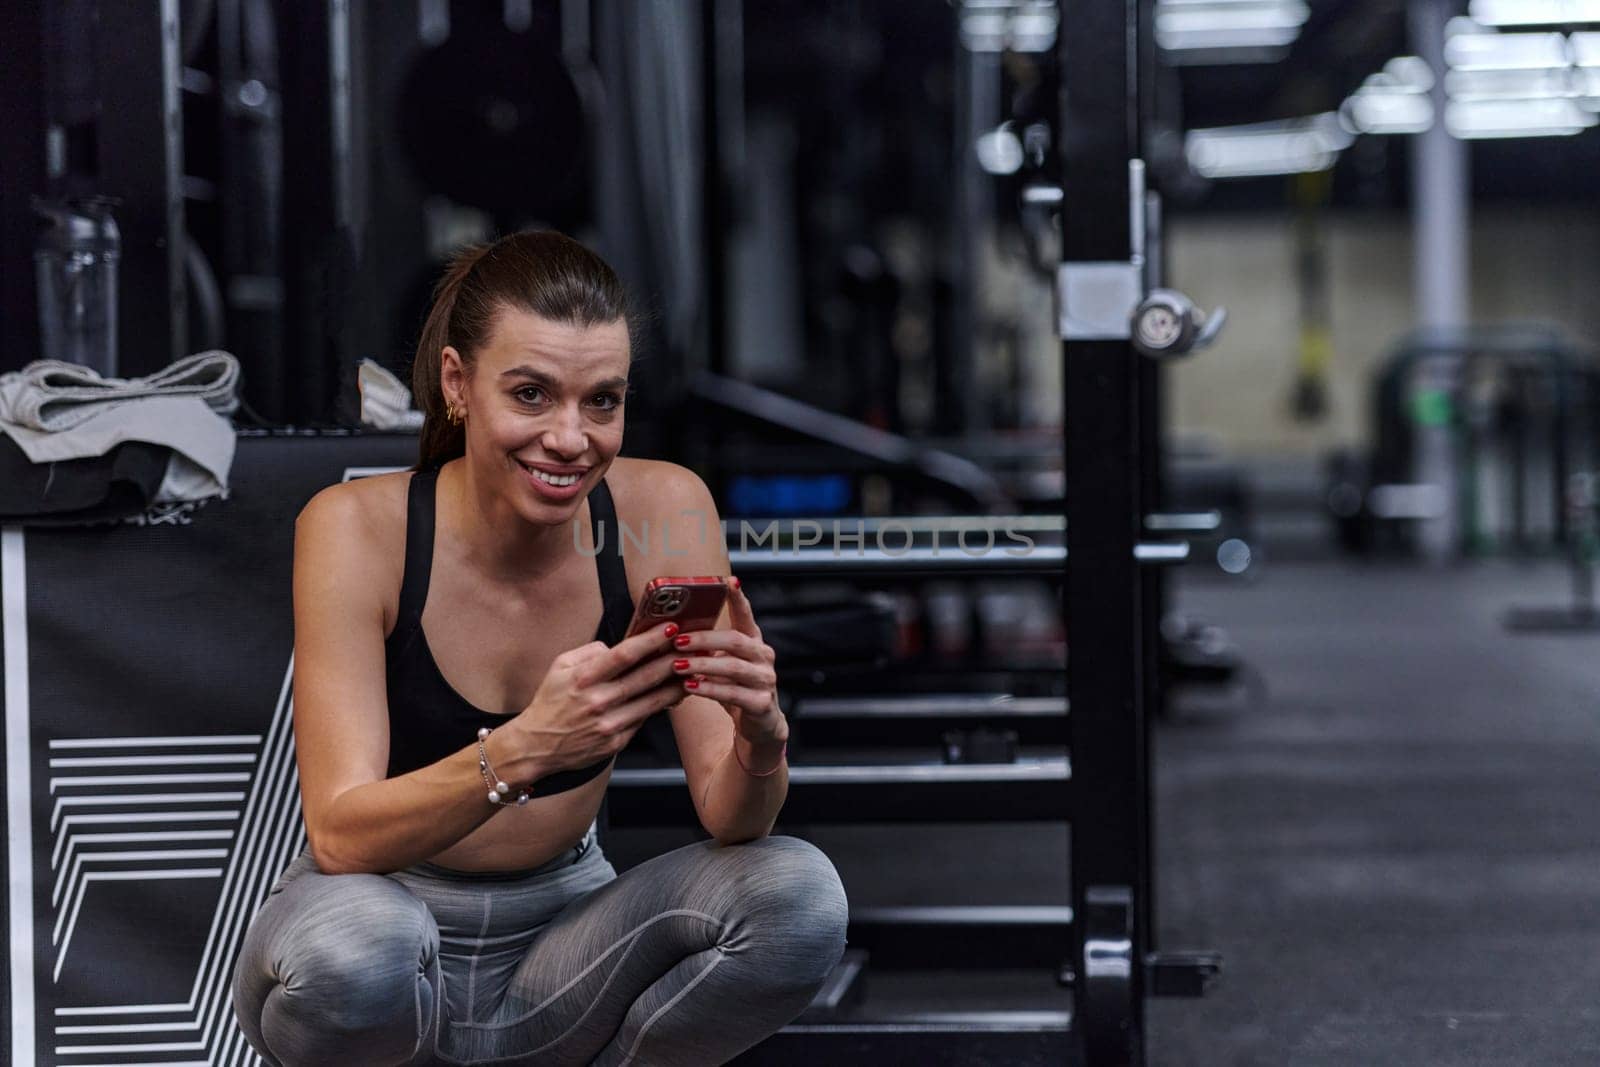 A fit woman in the gym taking a break from her training and uses her smartphone, embracing the convenience of technology to stay connected.